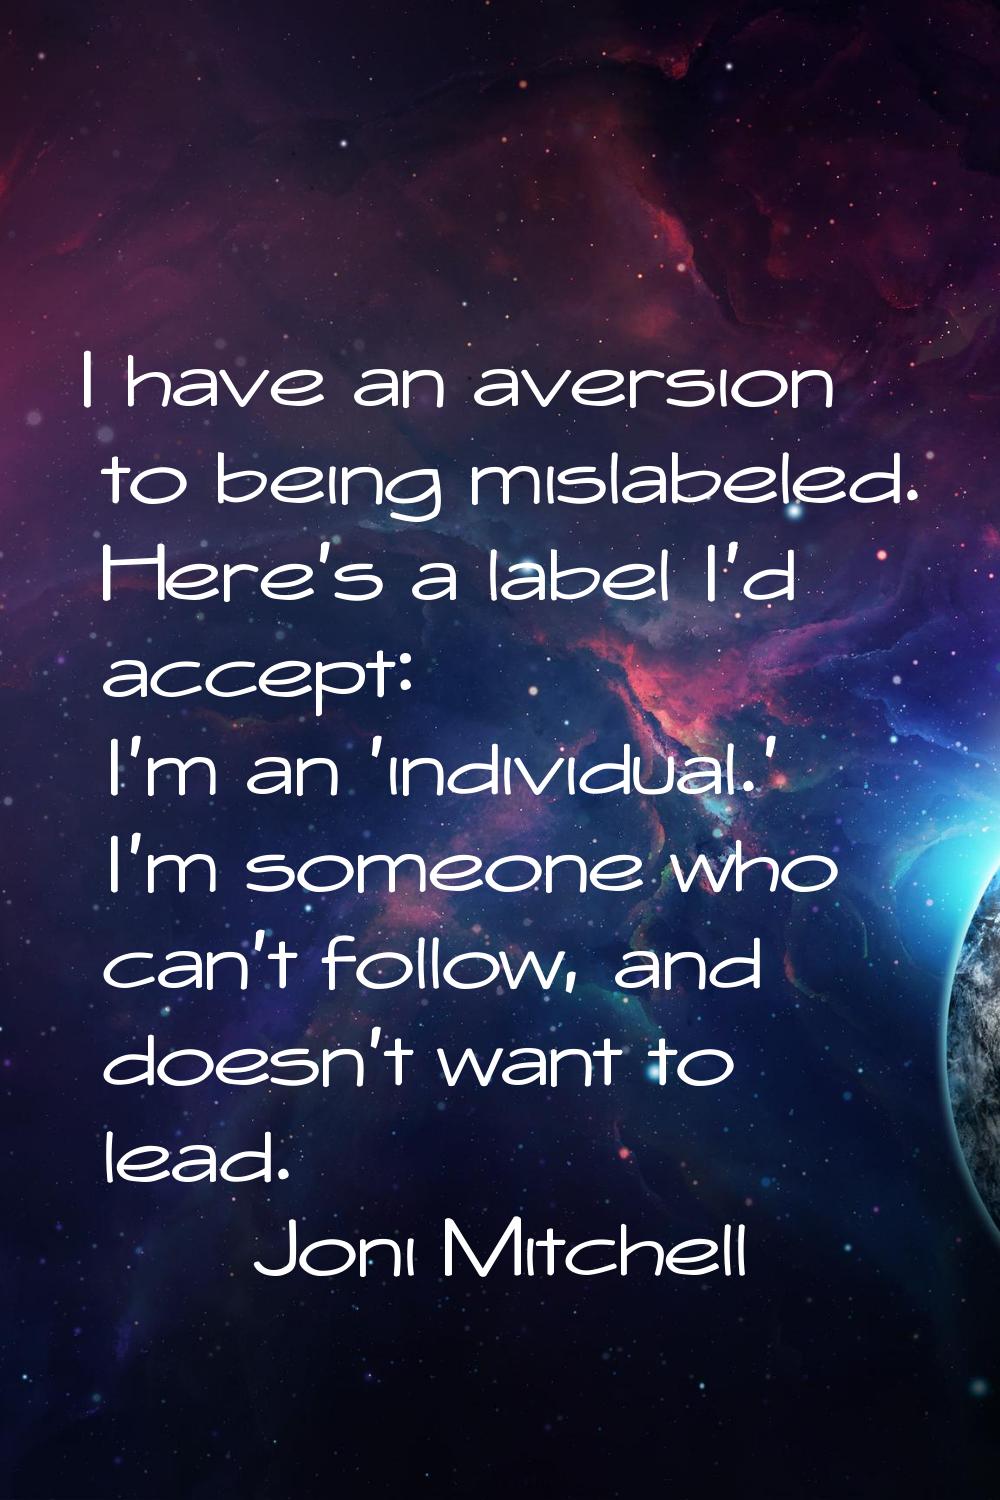 I have an aversion to being mislabeled. Here's a label I'd accept: I'm an 'individual.' I'm someone